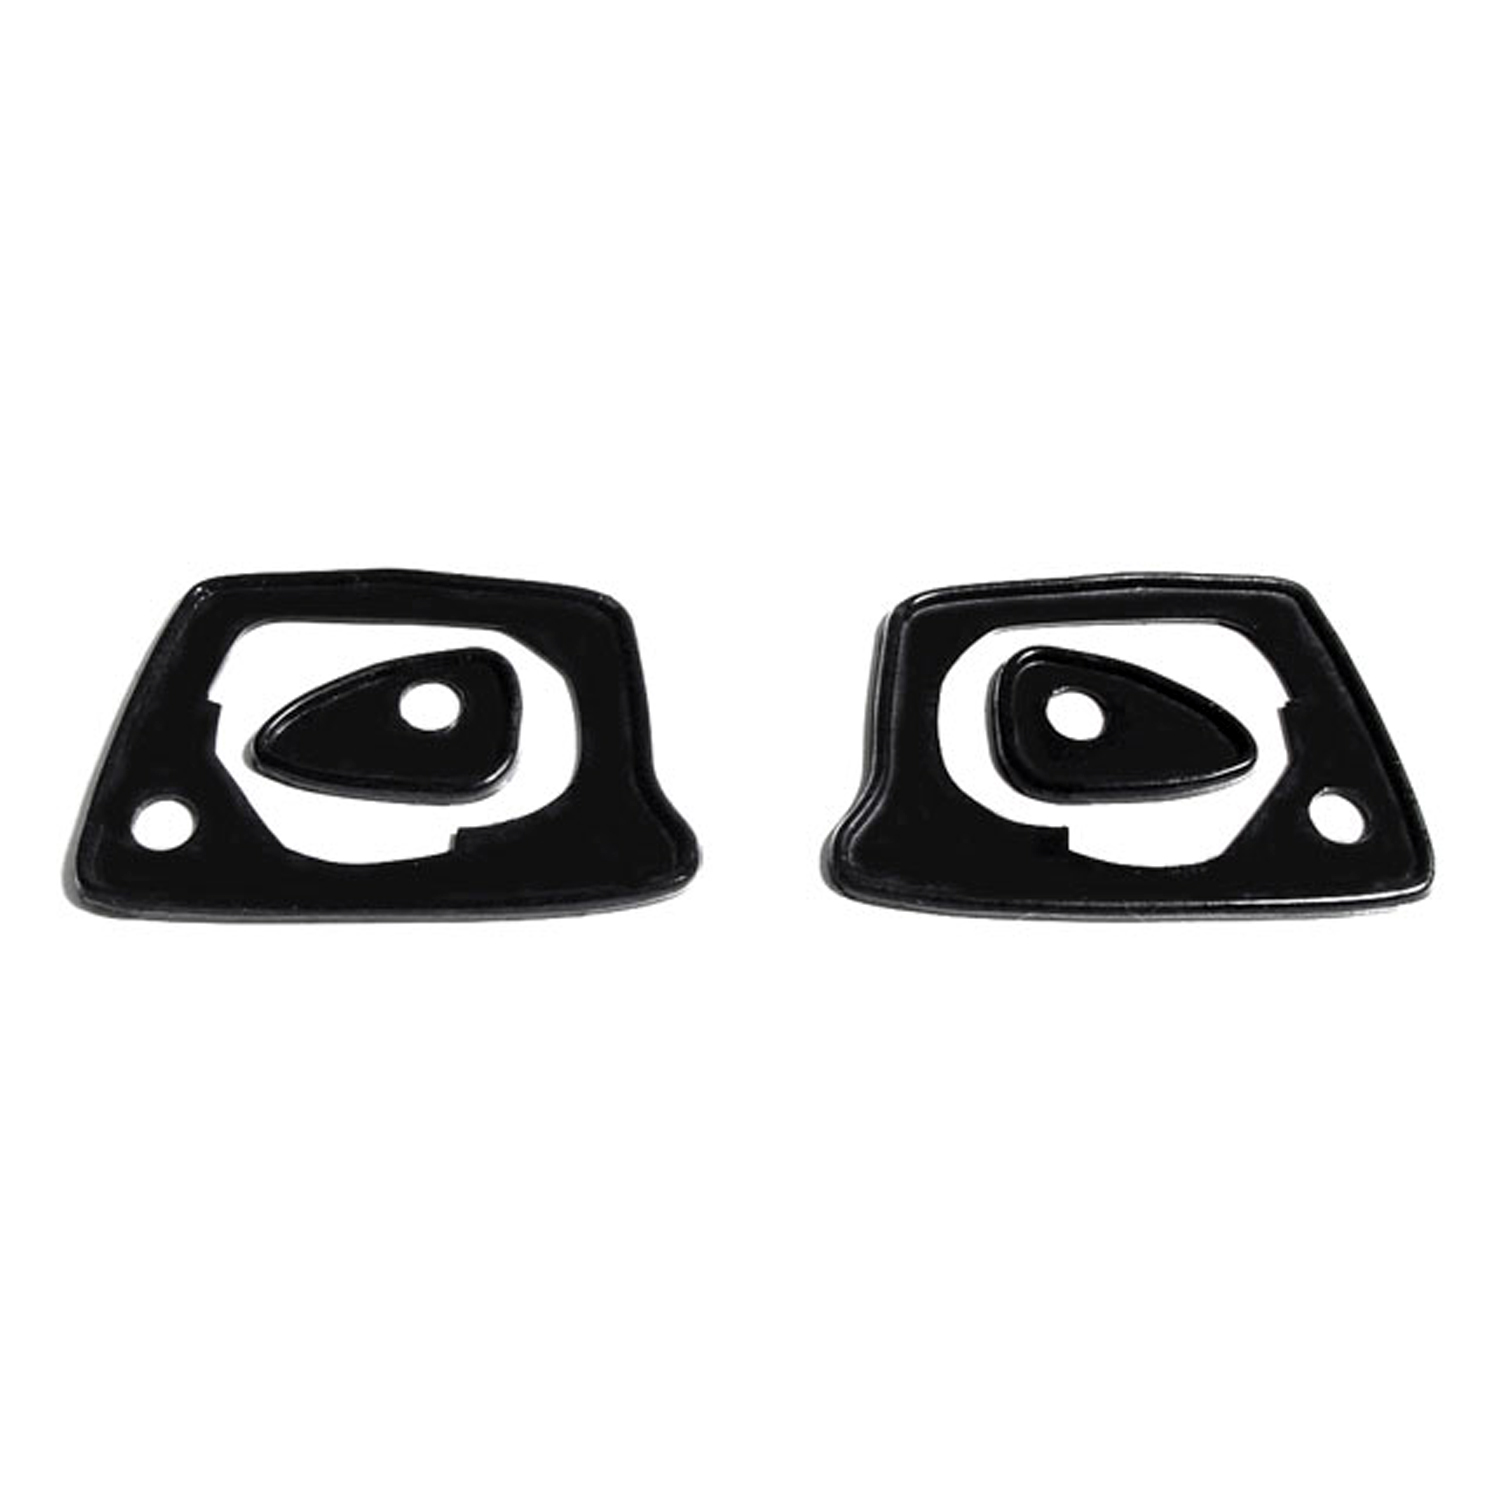 1968 Plymouth Fury III Door handle mounting pads.  2-3/8 in. L x 1-1/8 in. L-MP 959-B